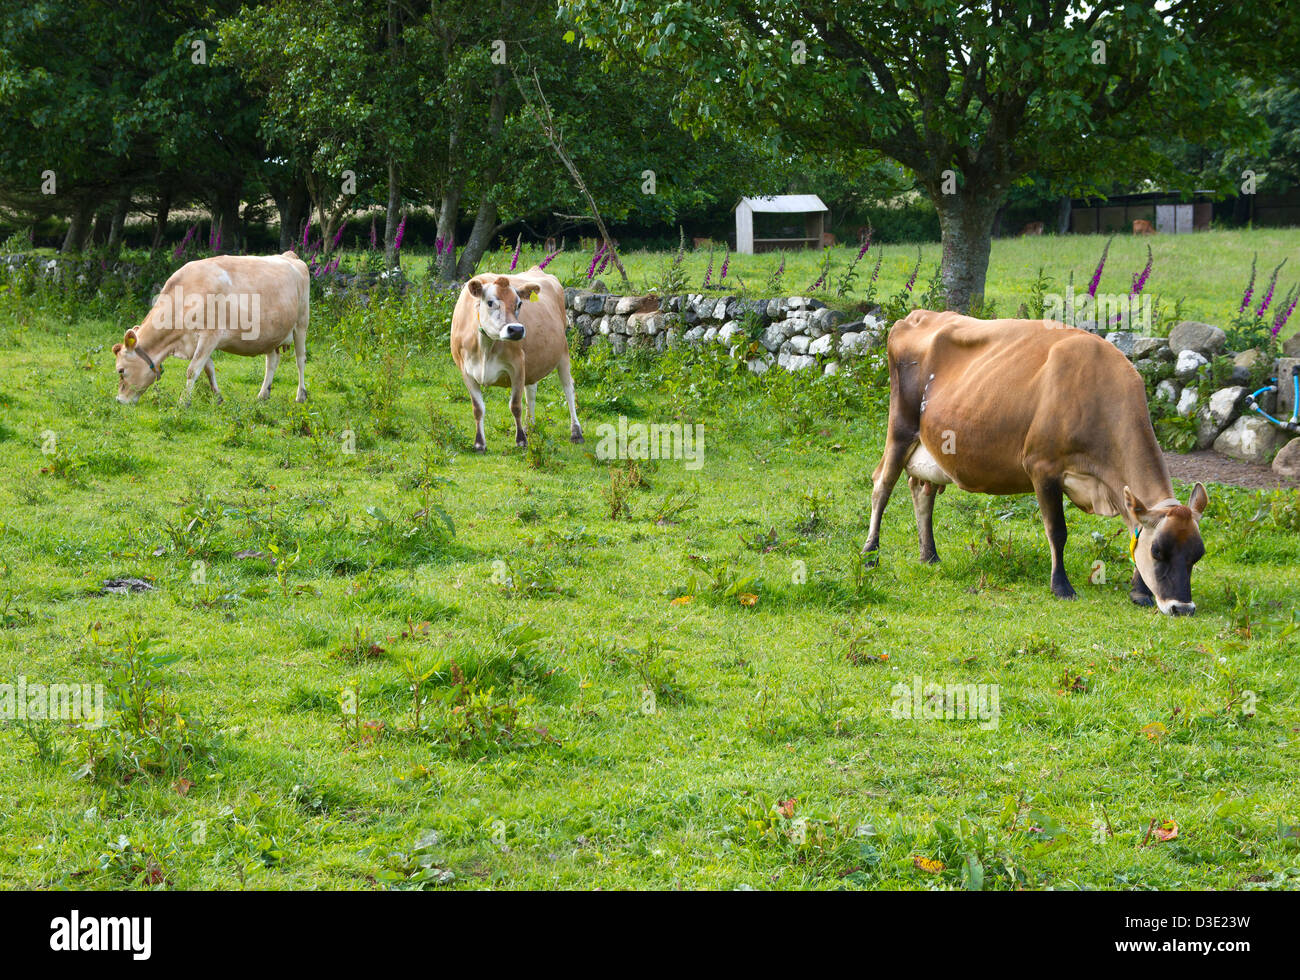 Jersey cows grazing Stock Photo